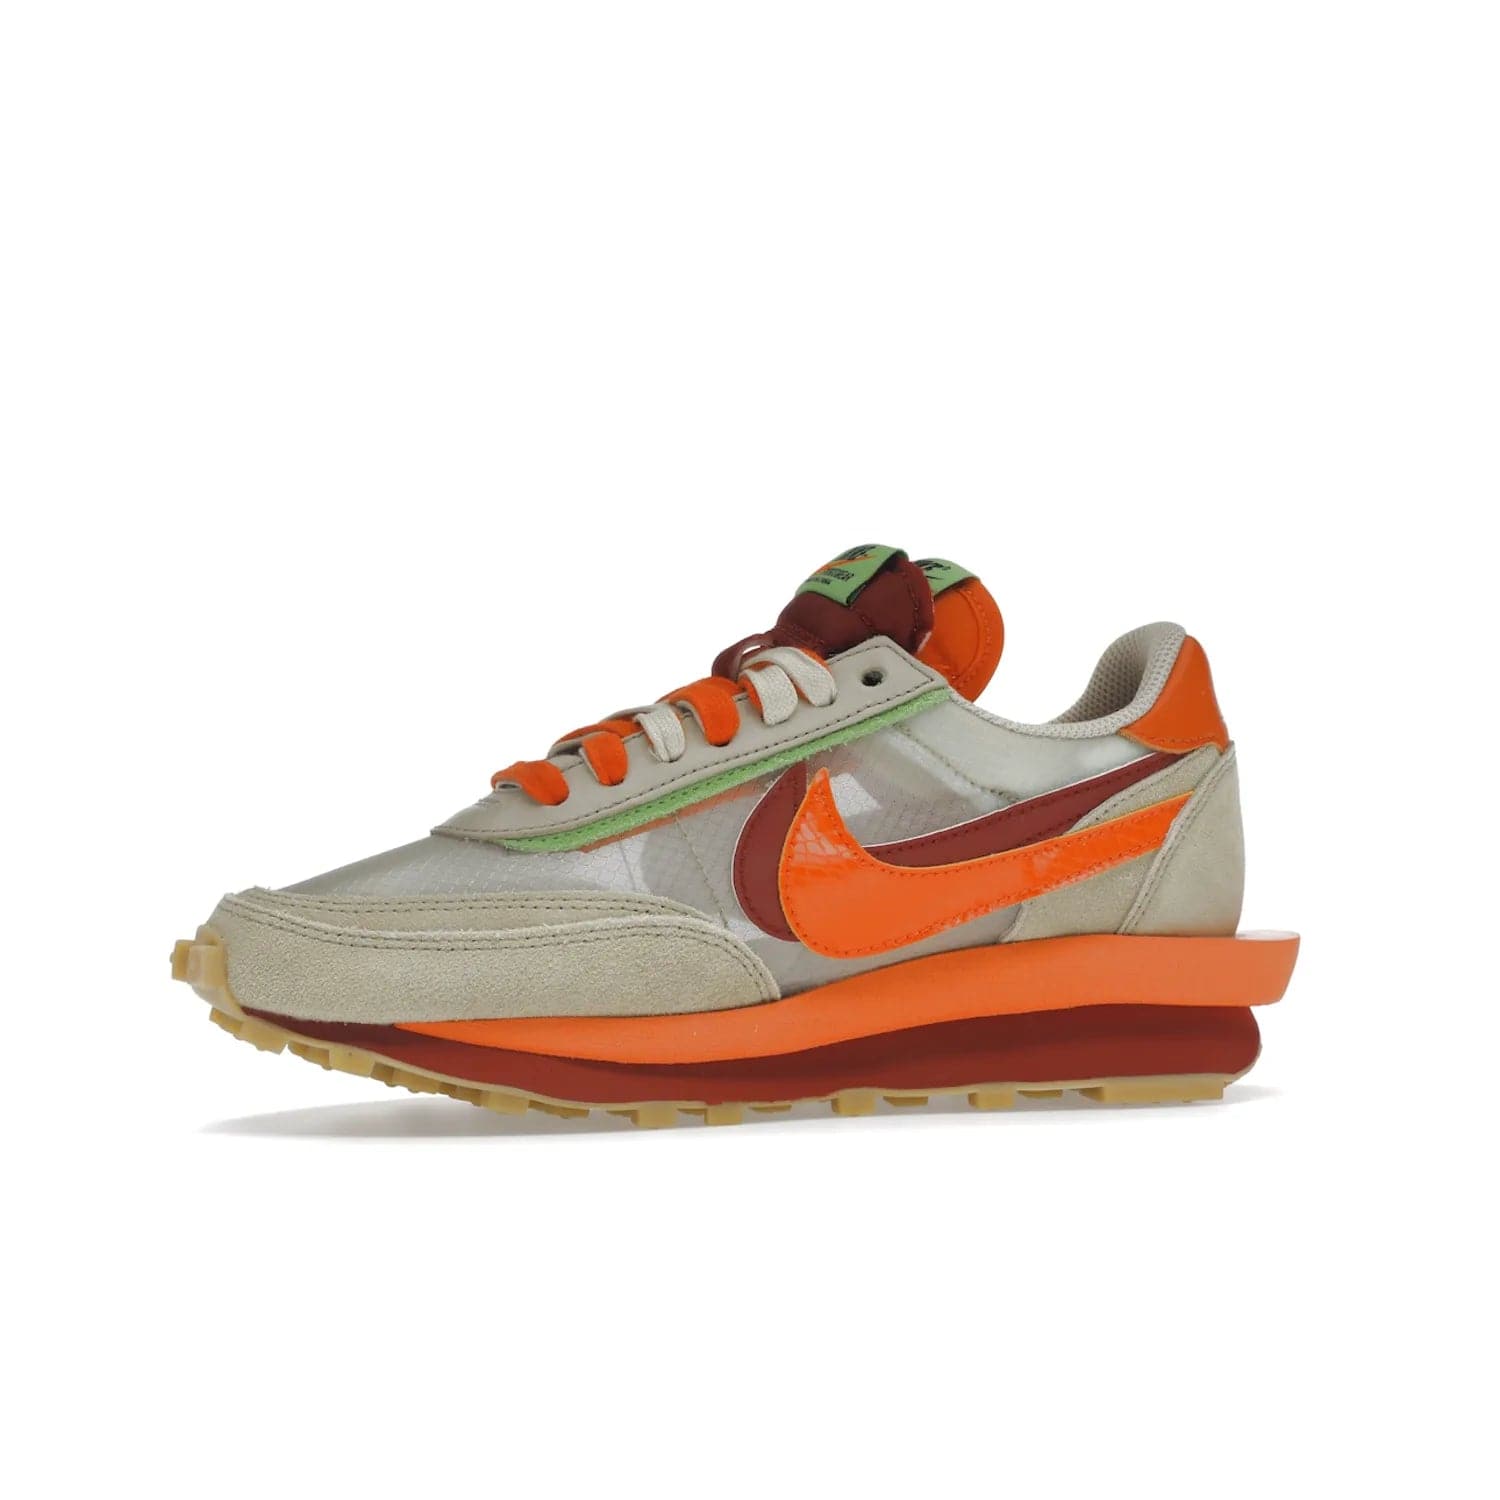 Nike LD Waffle sacai CLOT Kiss of Death Net Orange Blaze - Image 17 - Only at www.BallersClubKickz.com - A bold and stylish Nike LD Waffle sacai CLOT Kiss of Death Net Orange Blaze sneaker featuring a unique off-white, Deep Red & Orange Blaze Swooshes, two-toned stacked sole and doubled tongue. Available in September 2021. Make a statement.